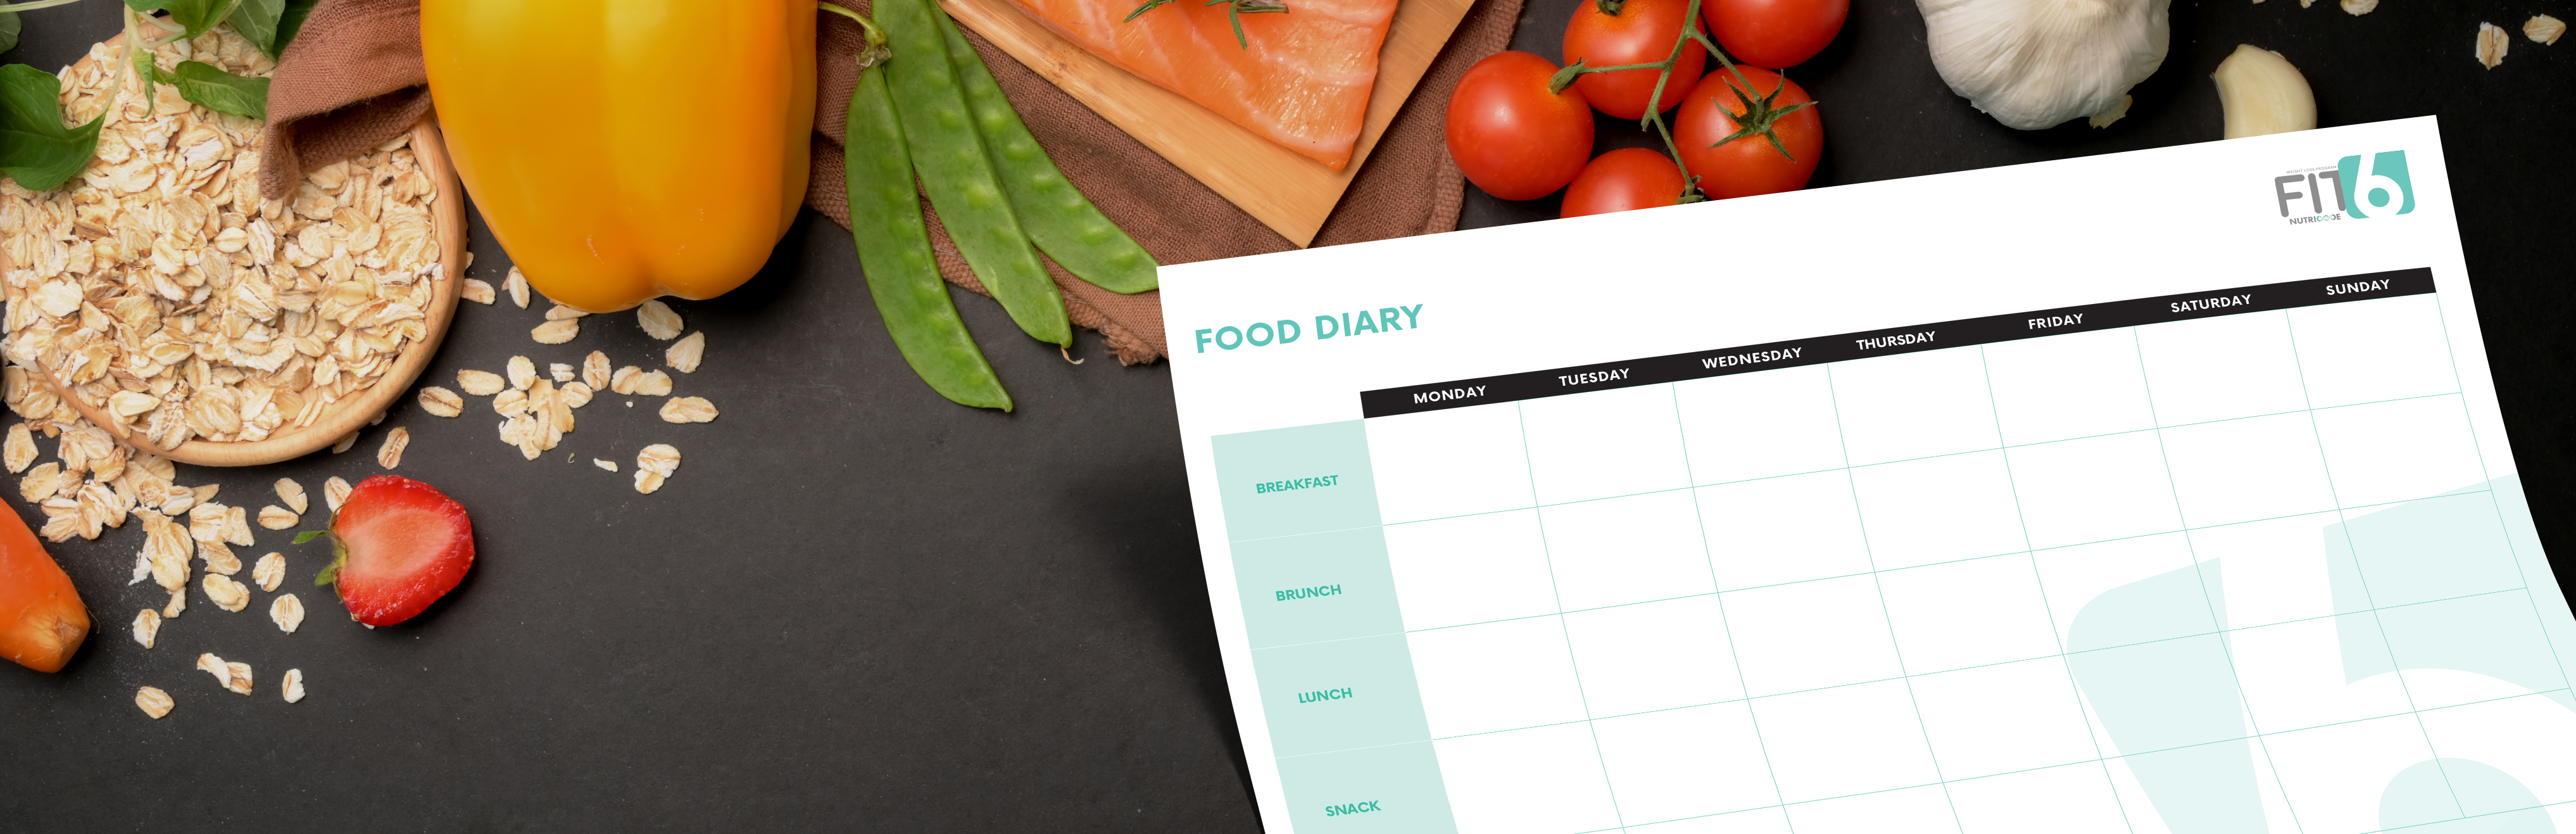 Most common mistakes in the Food Diary